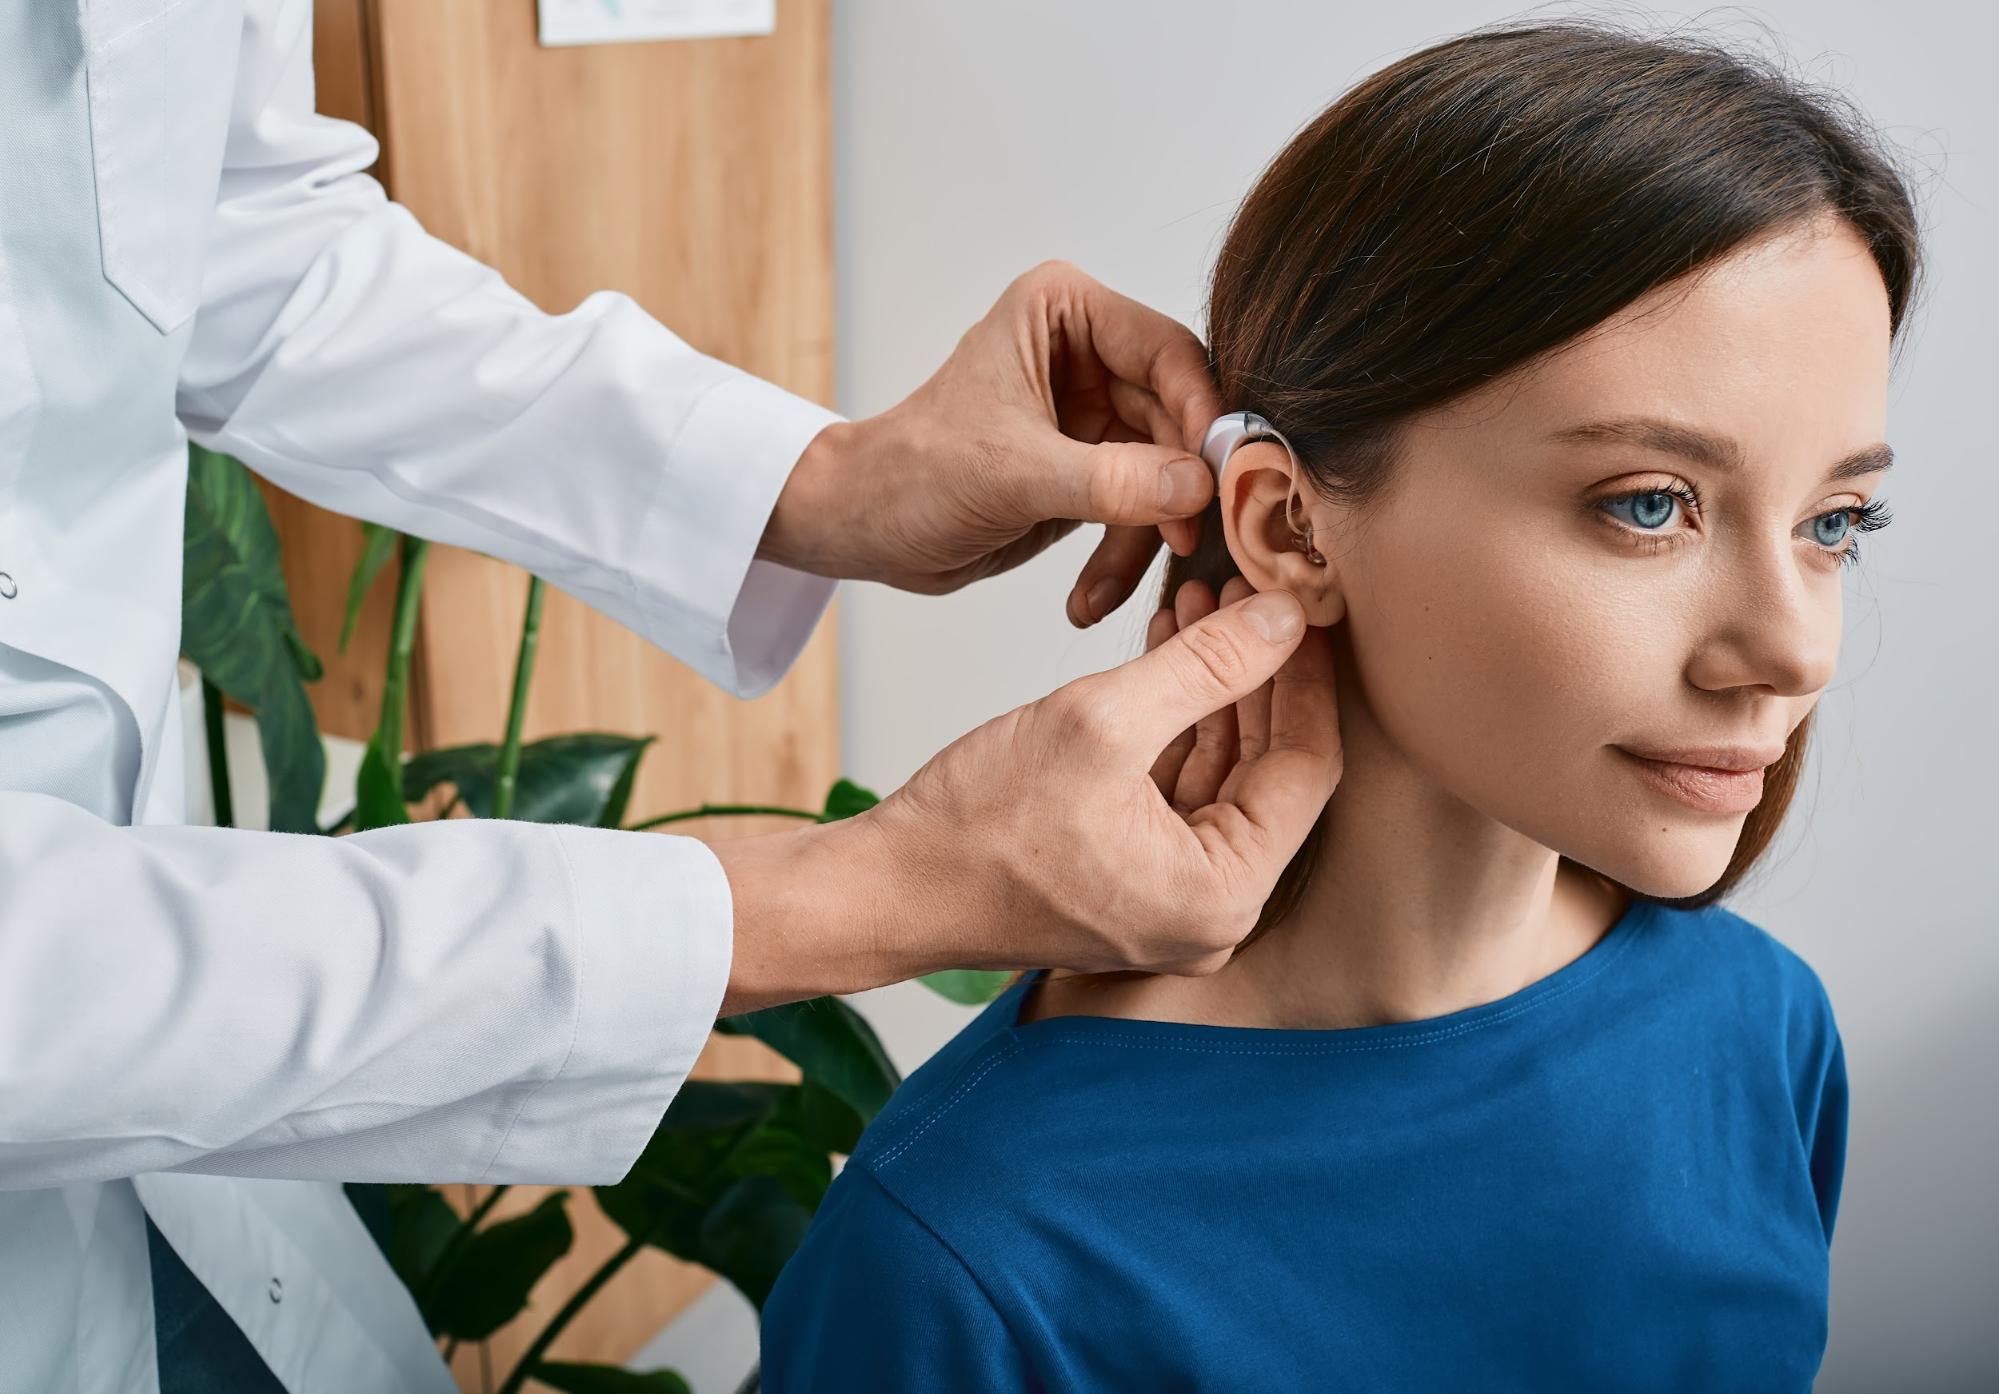 Got new hearing aids? here’s how to clean and care for them